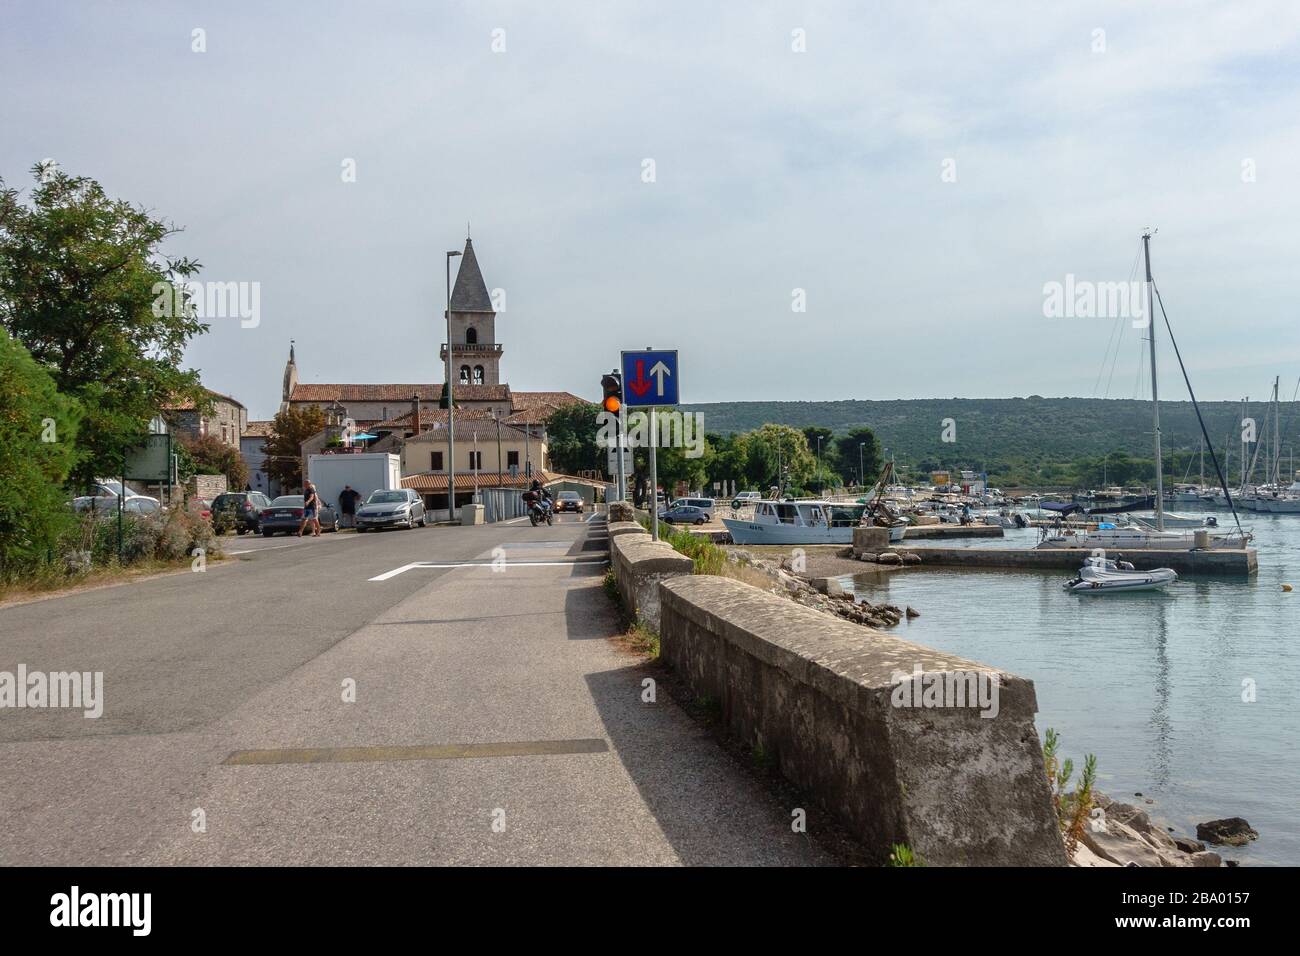 A traffic light at the bridge connecting Cres and Losinj islands in the town of Osor Stock Photo